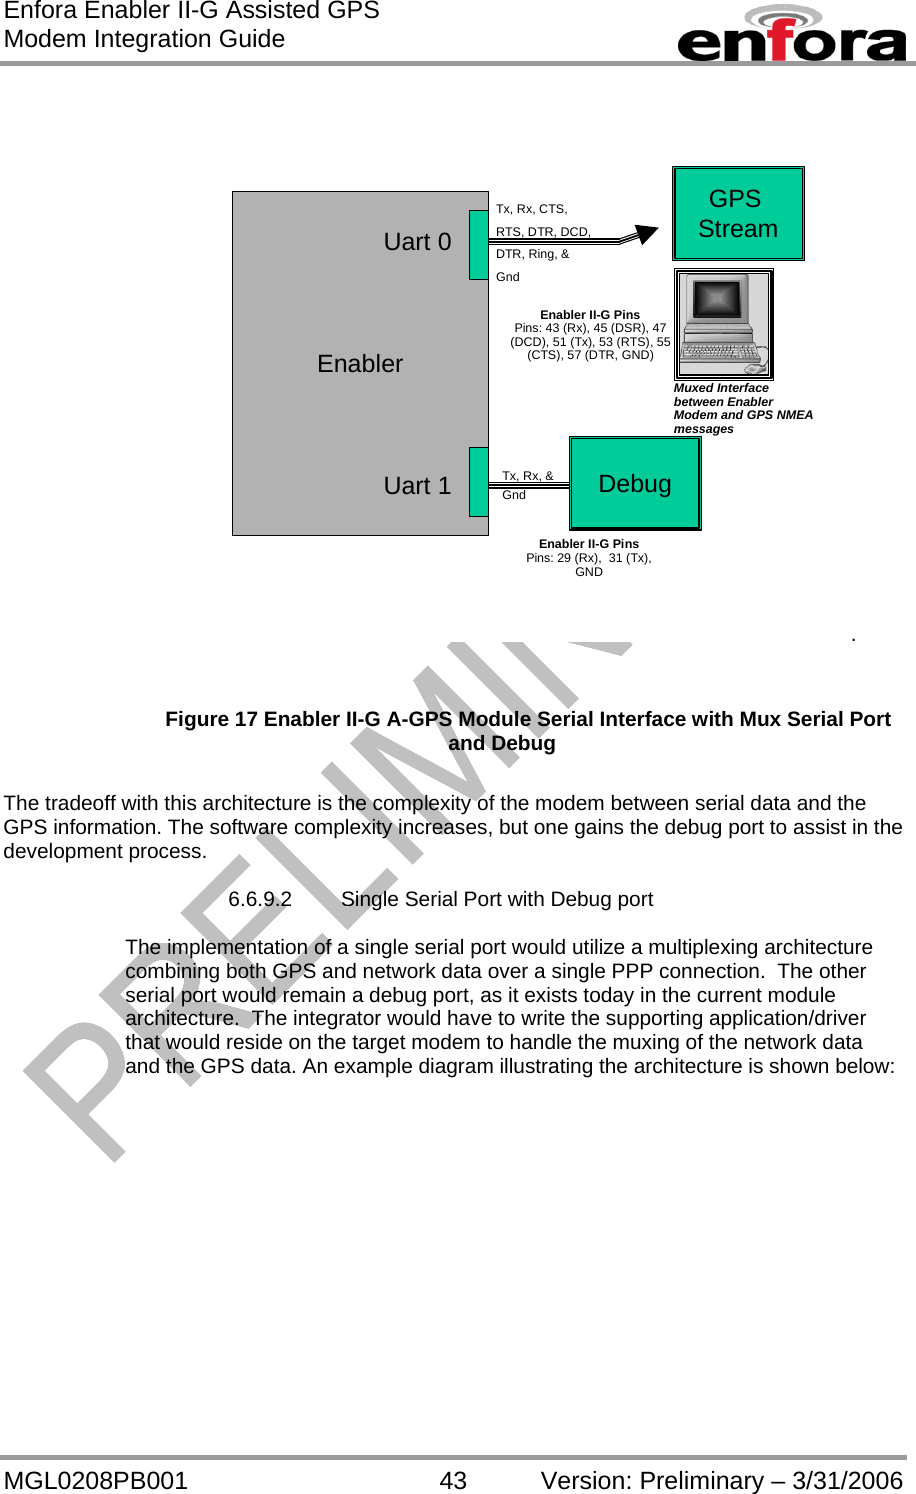 Enfora Enabler II-G Assisted GPS Modem Integration Guide MGL0208PB001 43 Version: Preliminary – 3/31/2006 EnablerUart 1Uart 0DebugTx, Rx, &amp; GndTx, Rx, CTS, RTS, DTR, DCD, DTR, Ring, &amp; GndEnabler II-G PinsPins: 43 (Rx), 45 (DSR), 47 (DCD), 51 (Tx), 53 (RTS), 55 (CTS), 57 (DTR, GND)Enabler II-G PinsPins: 29 (Rx),  31 (Tx), GNDGPS StreamMuxed Interface between Enabler Modem and GPS NMEA messages.      Figure 17 Enabler II-G A-GPS Module Serial Interface with Mux Serial Port and Debug  The tradeoff with this architecture is the complexity of the modem between serial data and the GPS information. The software complexity increases, but one gains the debug port to assist in the development process.    6.6.9.2  Single Serial Port with Debug port  The implementation of a single serial port would utilize a multiplexing architecture combining both GPS and network data over a single PPP connection.  The other serial port would remain a debug port, as it exists today in the current module architecture.  The integrator would have to write the supporting application/driver that would reside on the target modem to handle the muxing of the network data and the GPS data. An example diagram illustrating the architecture is shown below:  